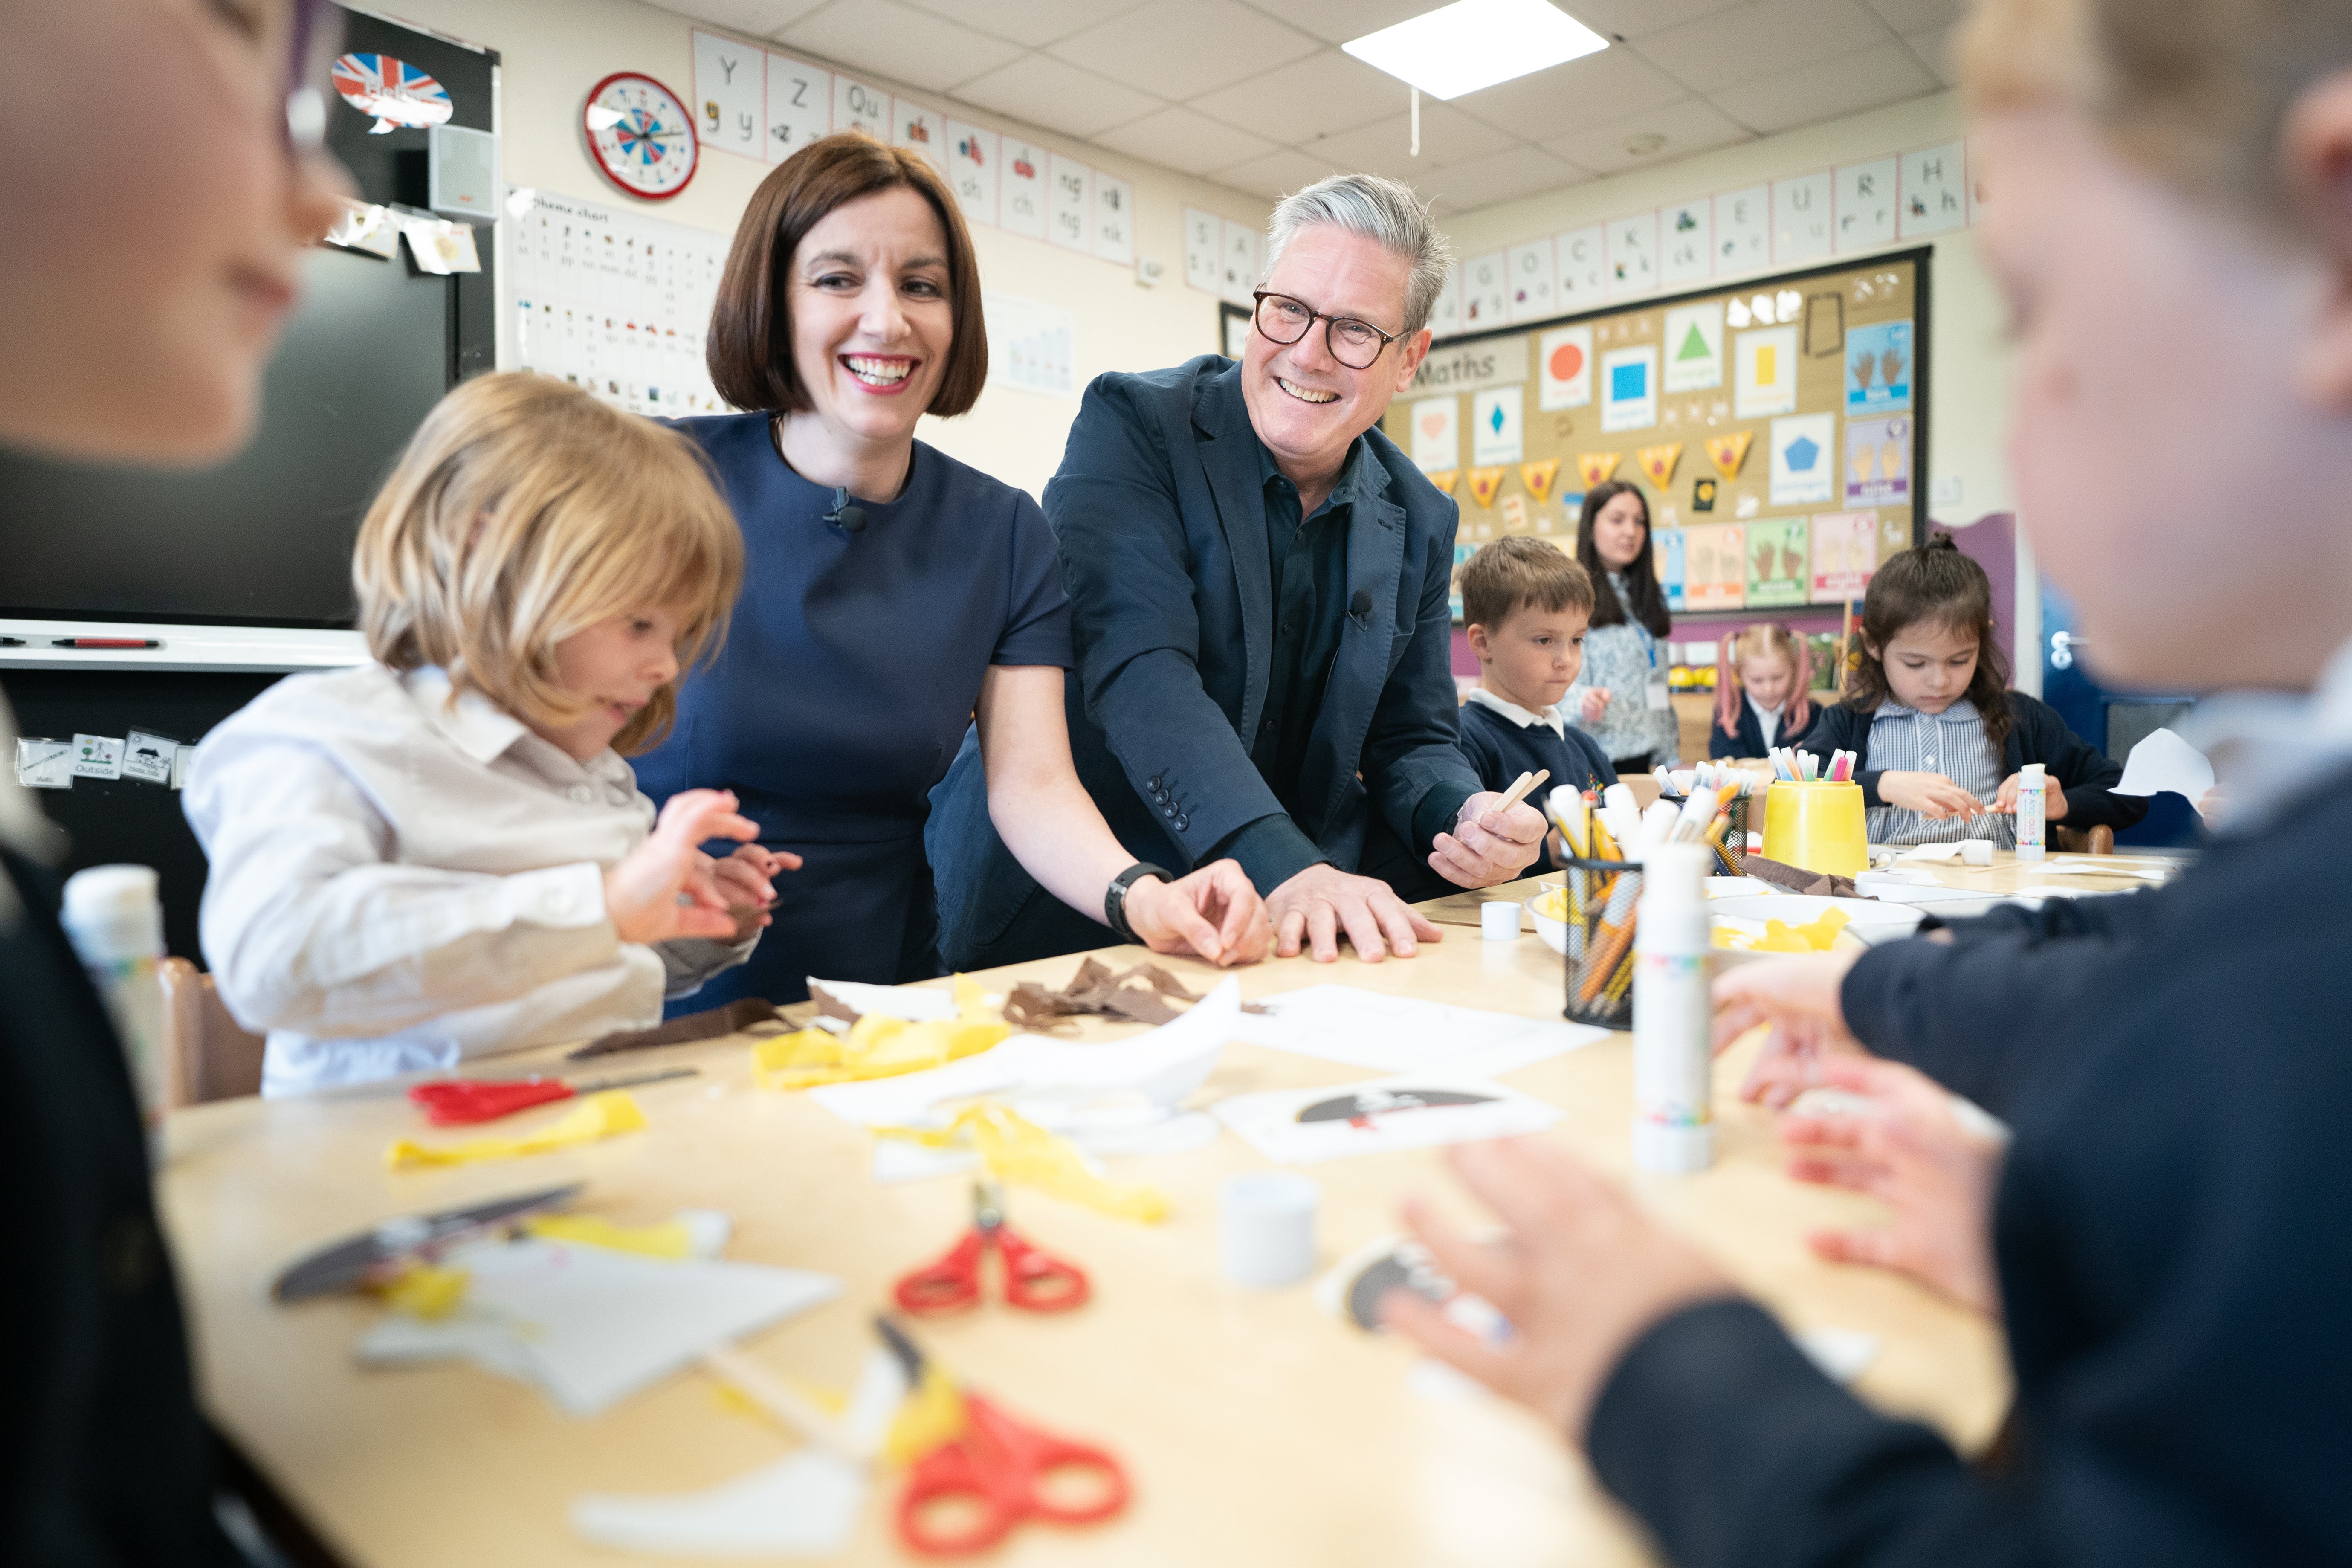 Sir Keir Starmer and Bridget Phillipson during a campaign visit to a Nuneaton primary school (Stefan Rousseau/PA)